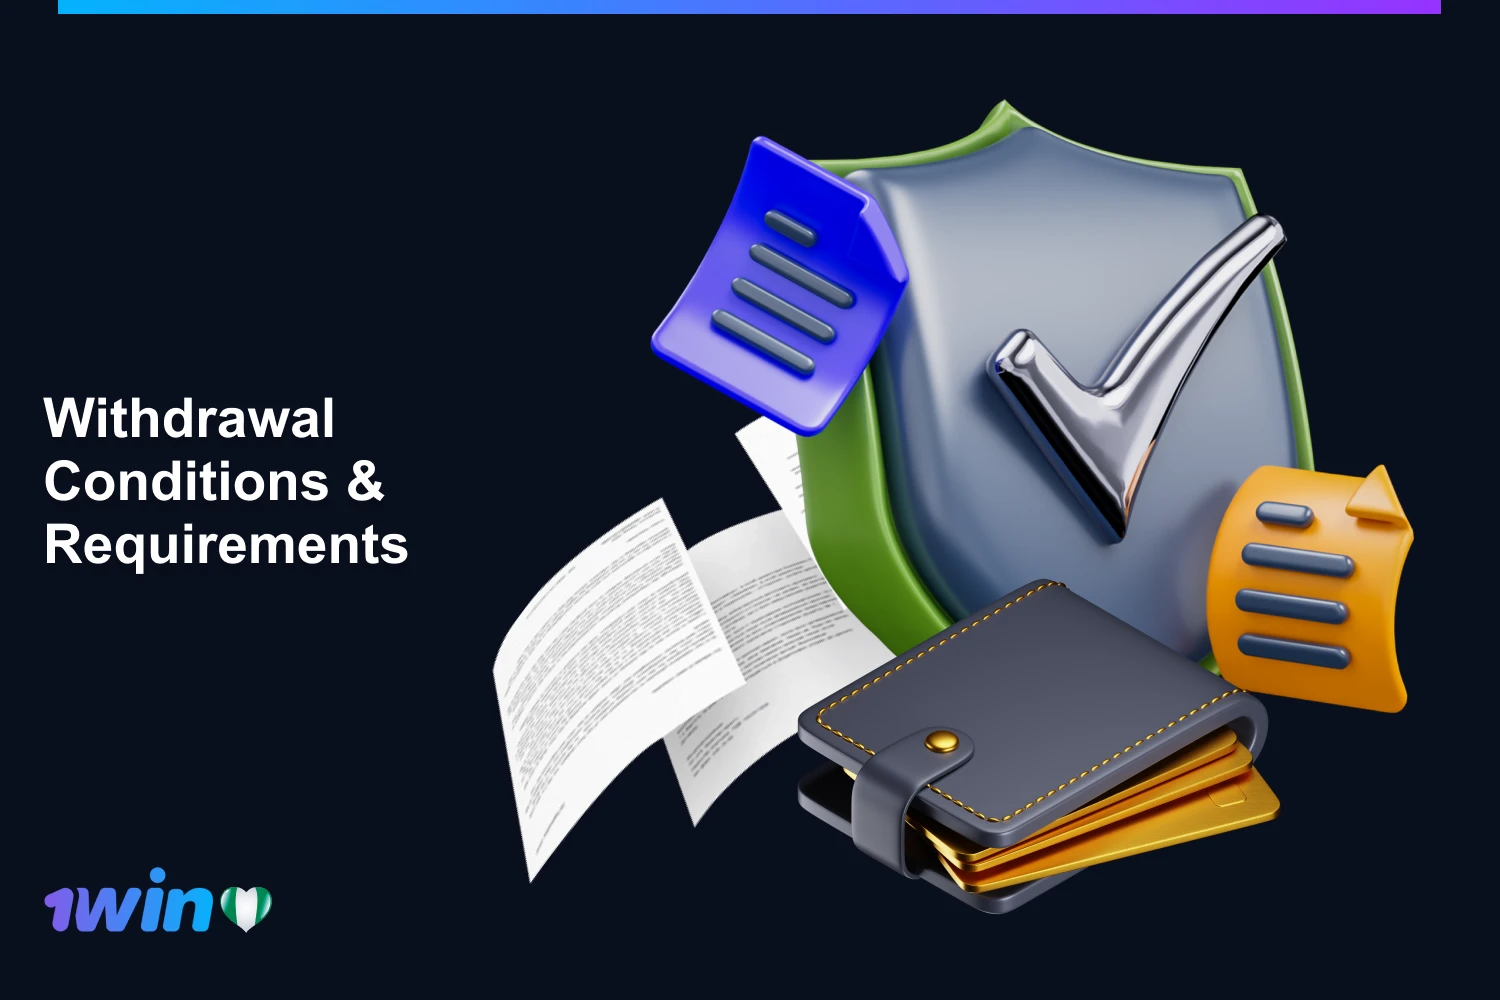 Nigerian players who plan to use the 1win withdrawal option must fulfill all the requirements specified in the T&Cs